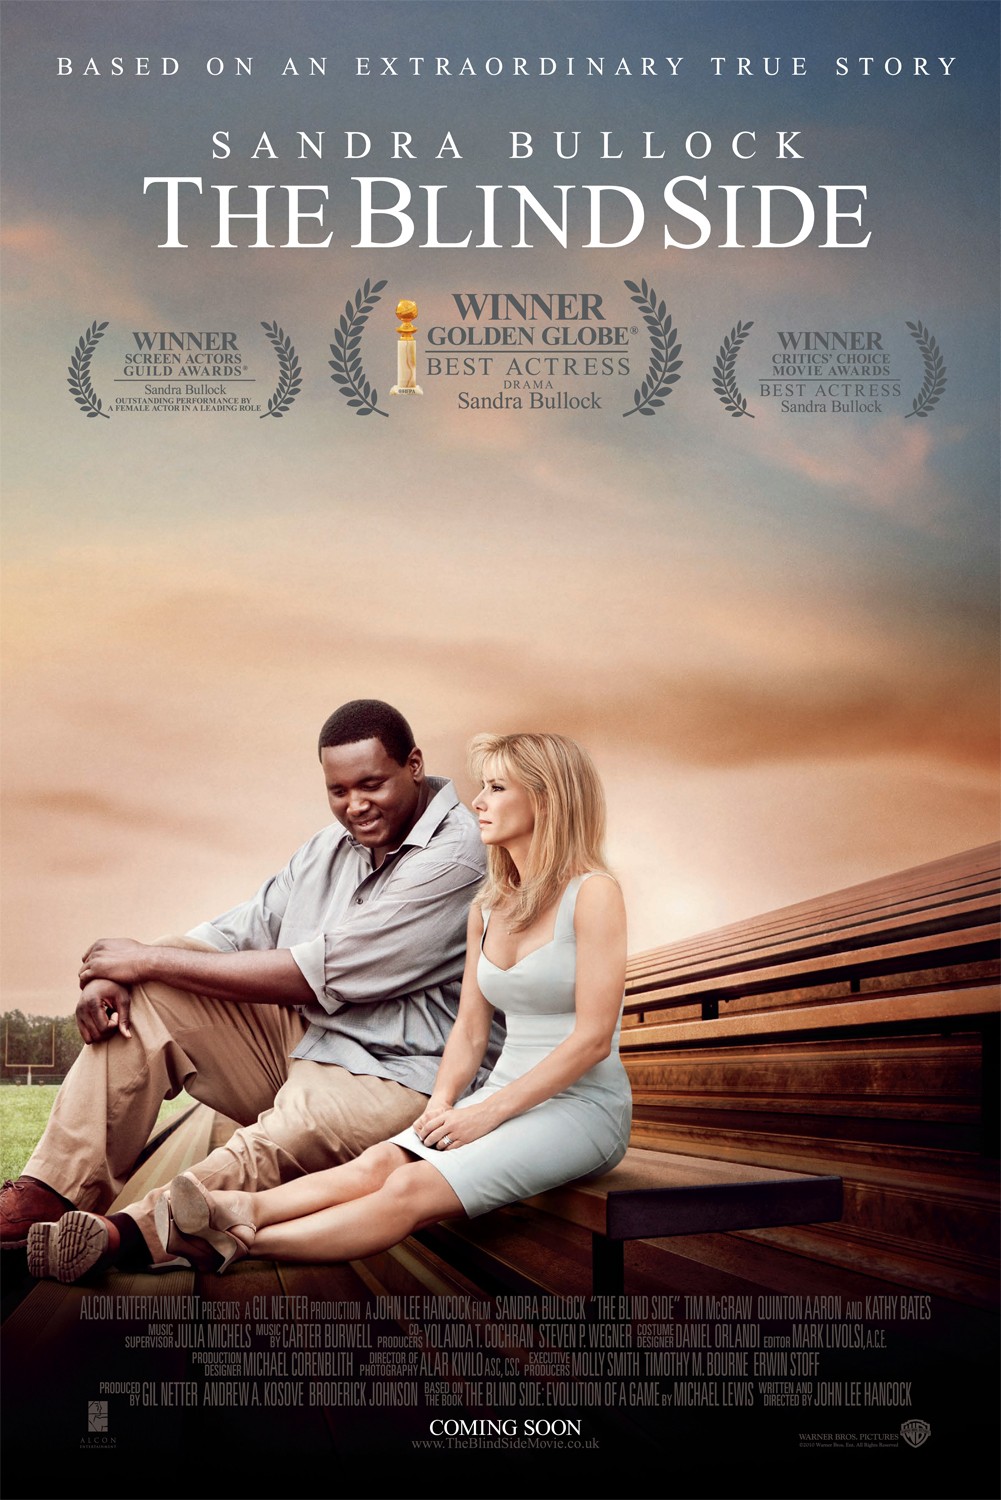 The Blind Side Posters - JoBlo